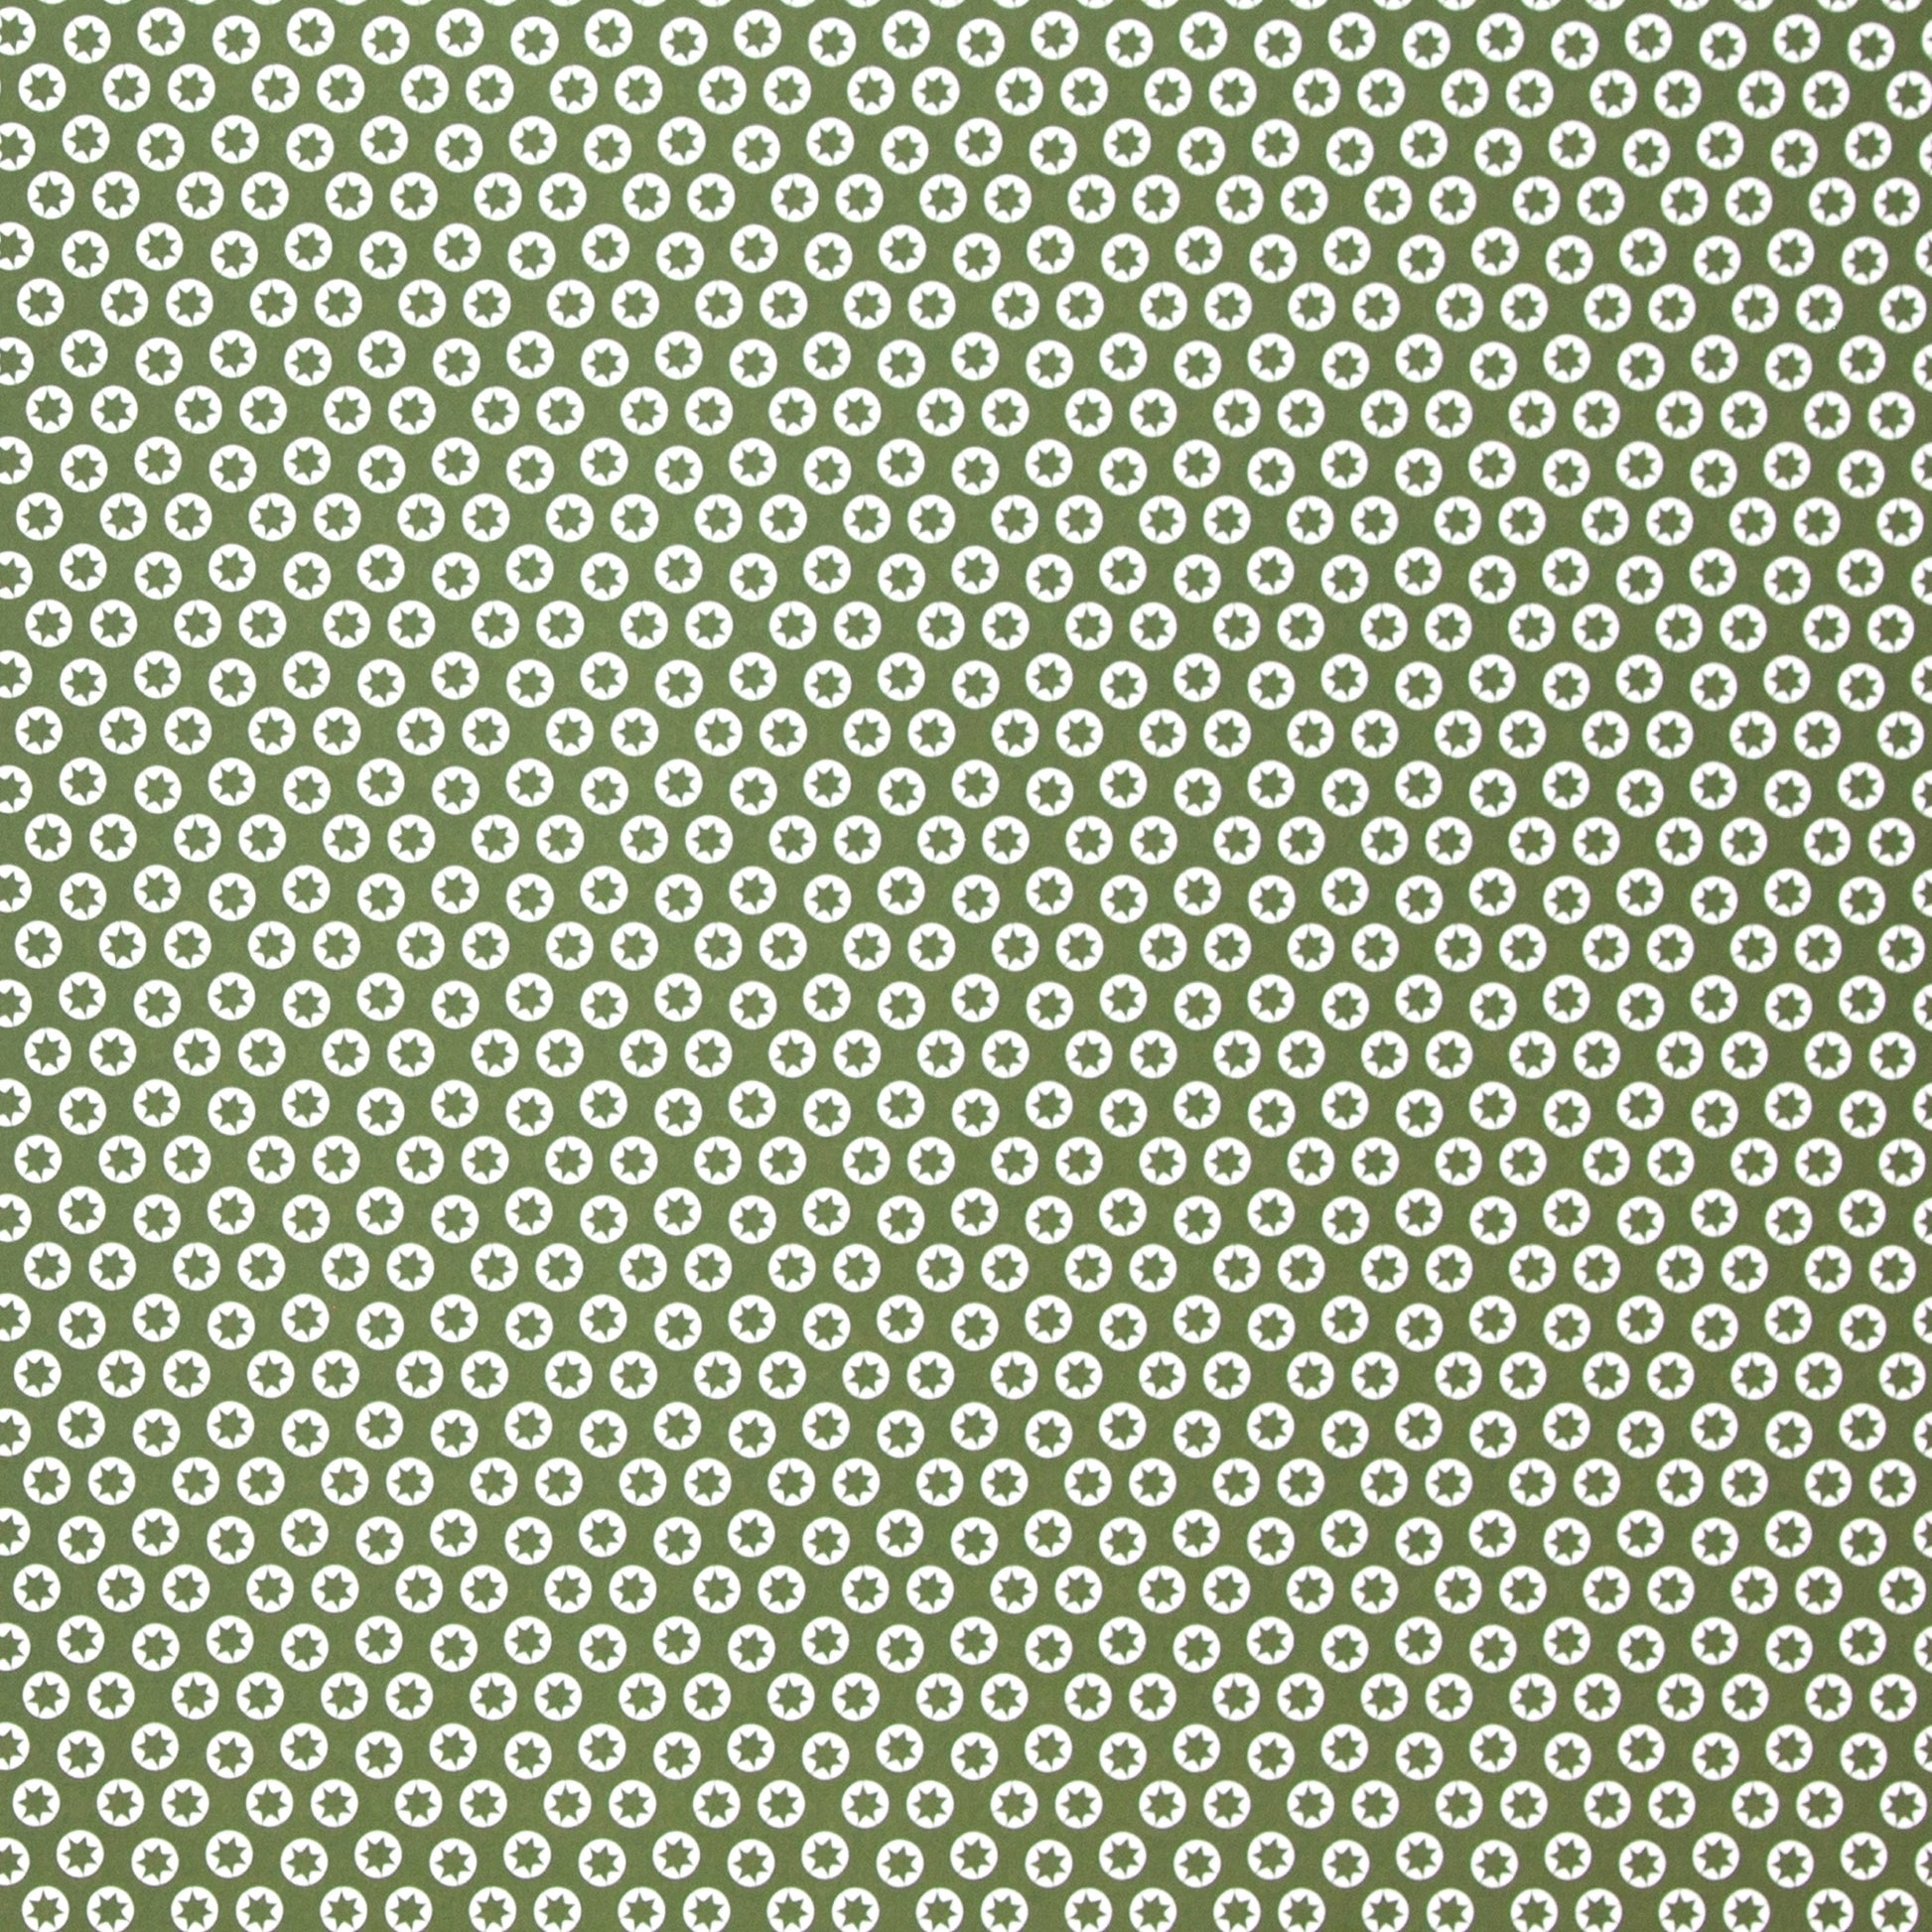 wrapping paper with an abstract tiny stars pattern in olive and white by Ola Studio